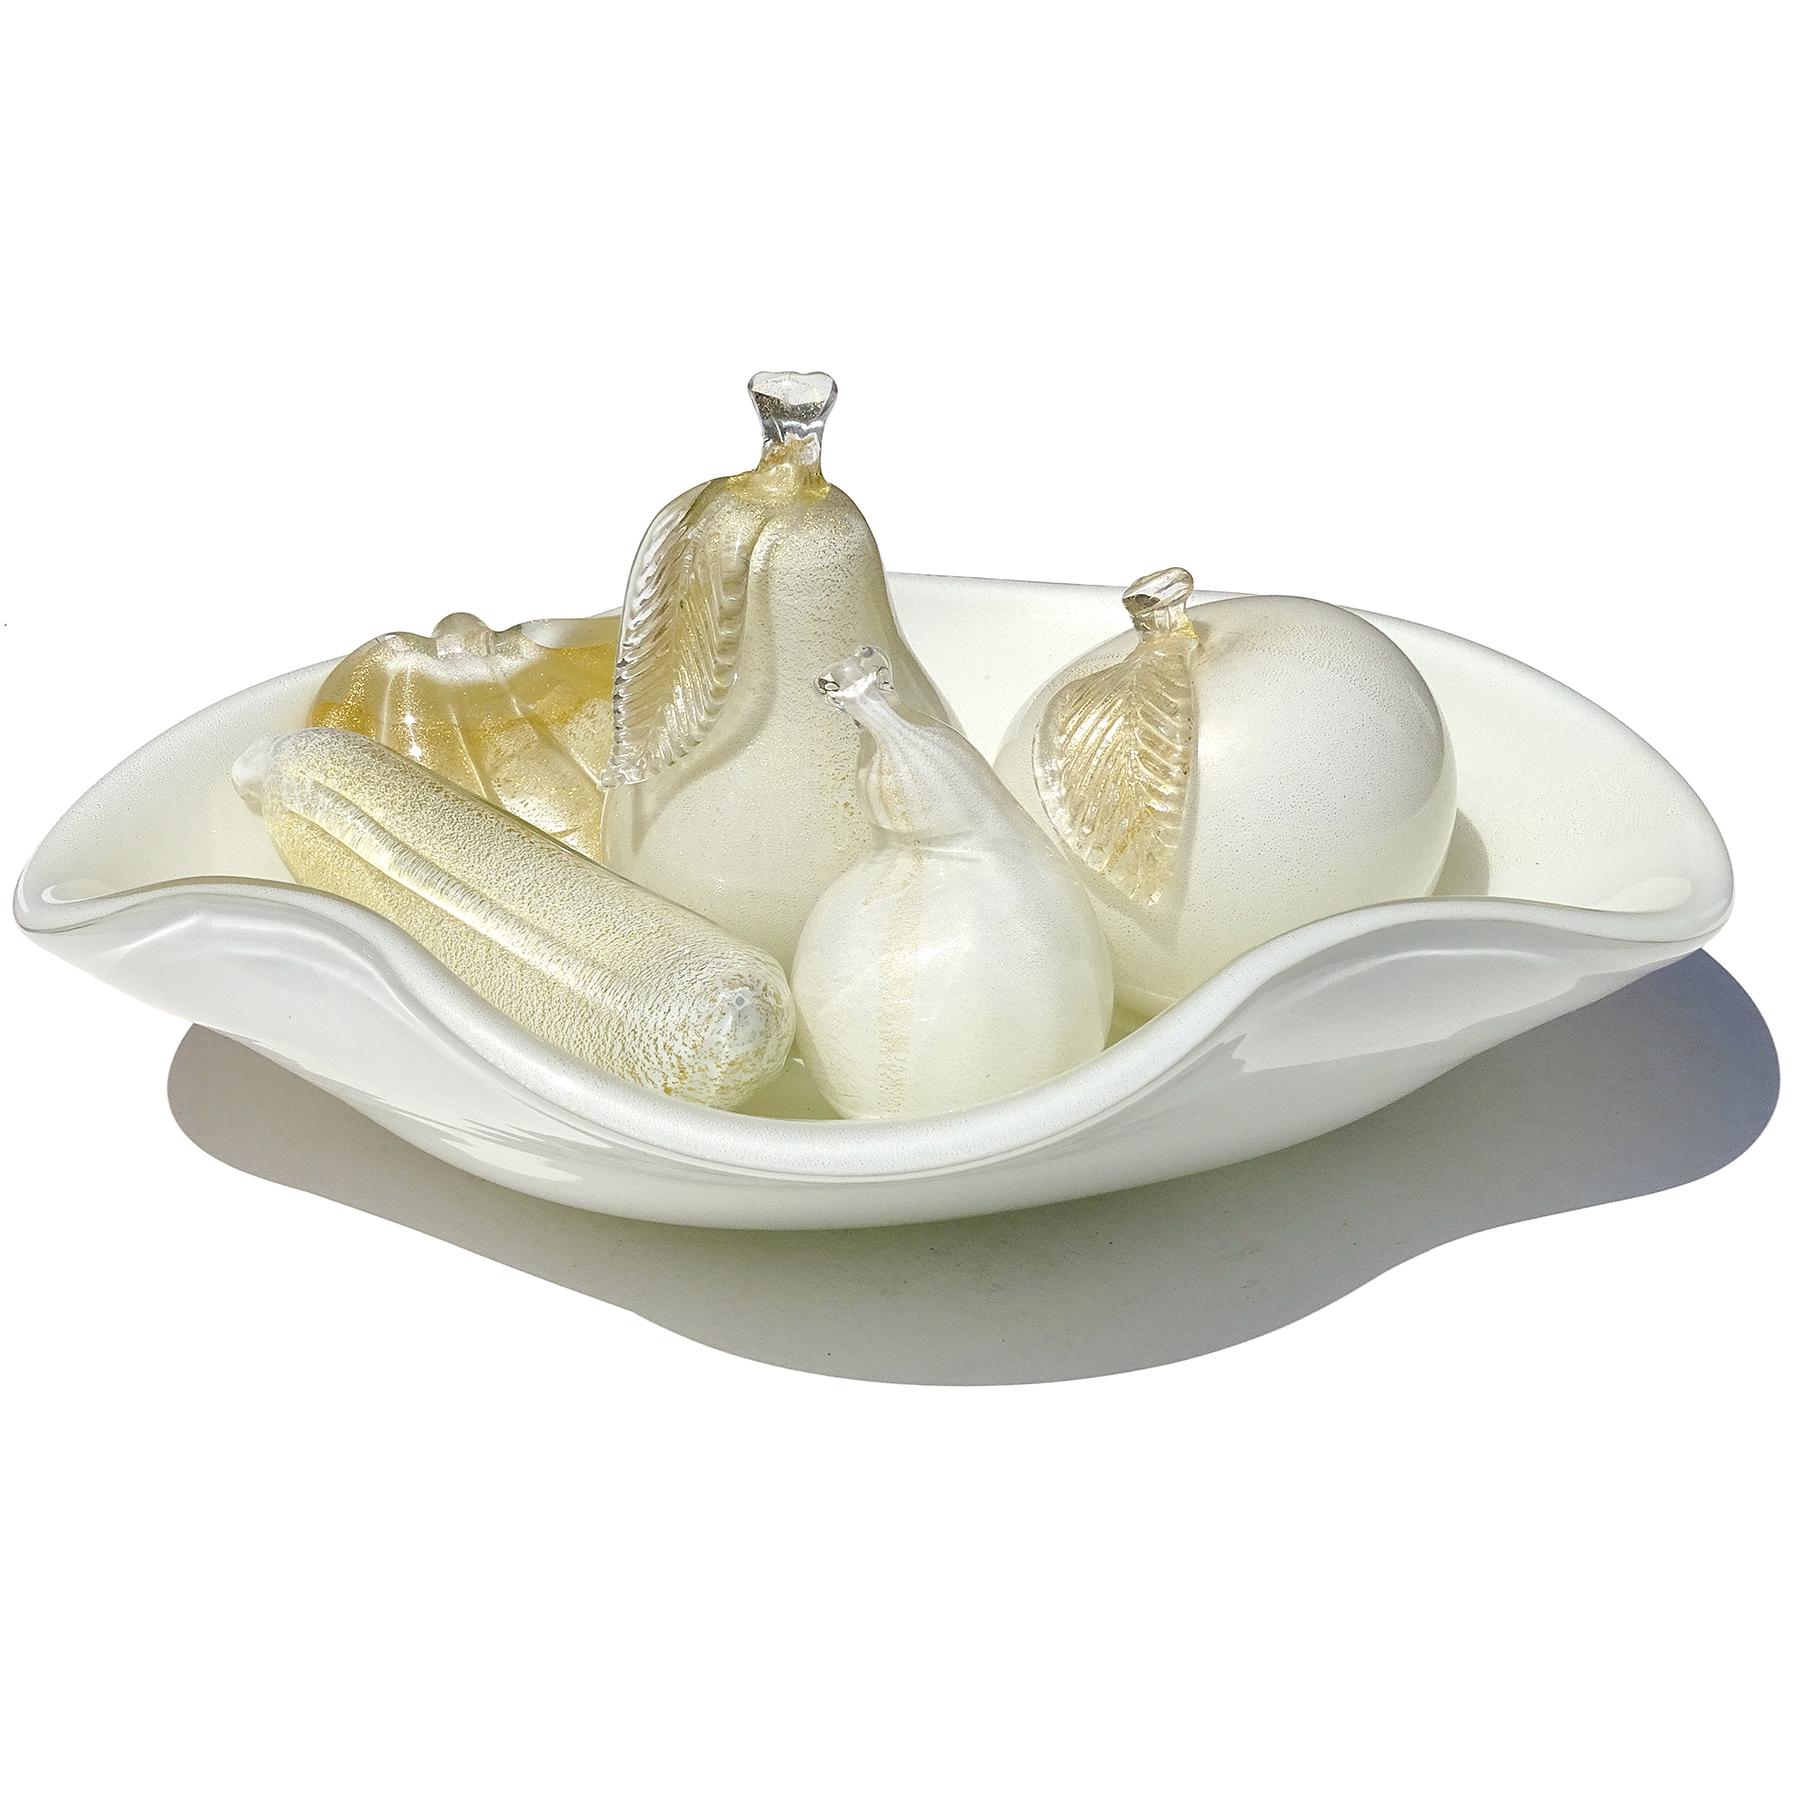 Elegant and very large Murano hand blown gold flecks over white Italian art glass conch shell centerpiece bowl along with 4 different fruit sculptures. Attributed to designer Alfredo Barbini. The bowl has a clear and gold leaf handle, on a wavy,